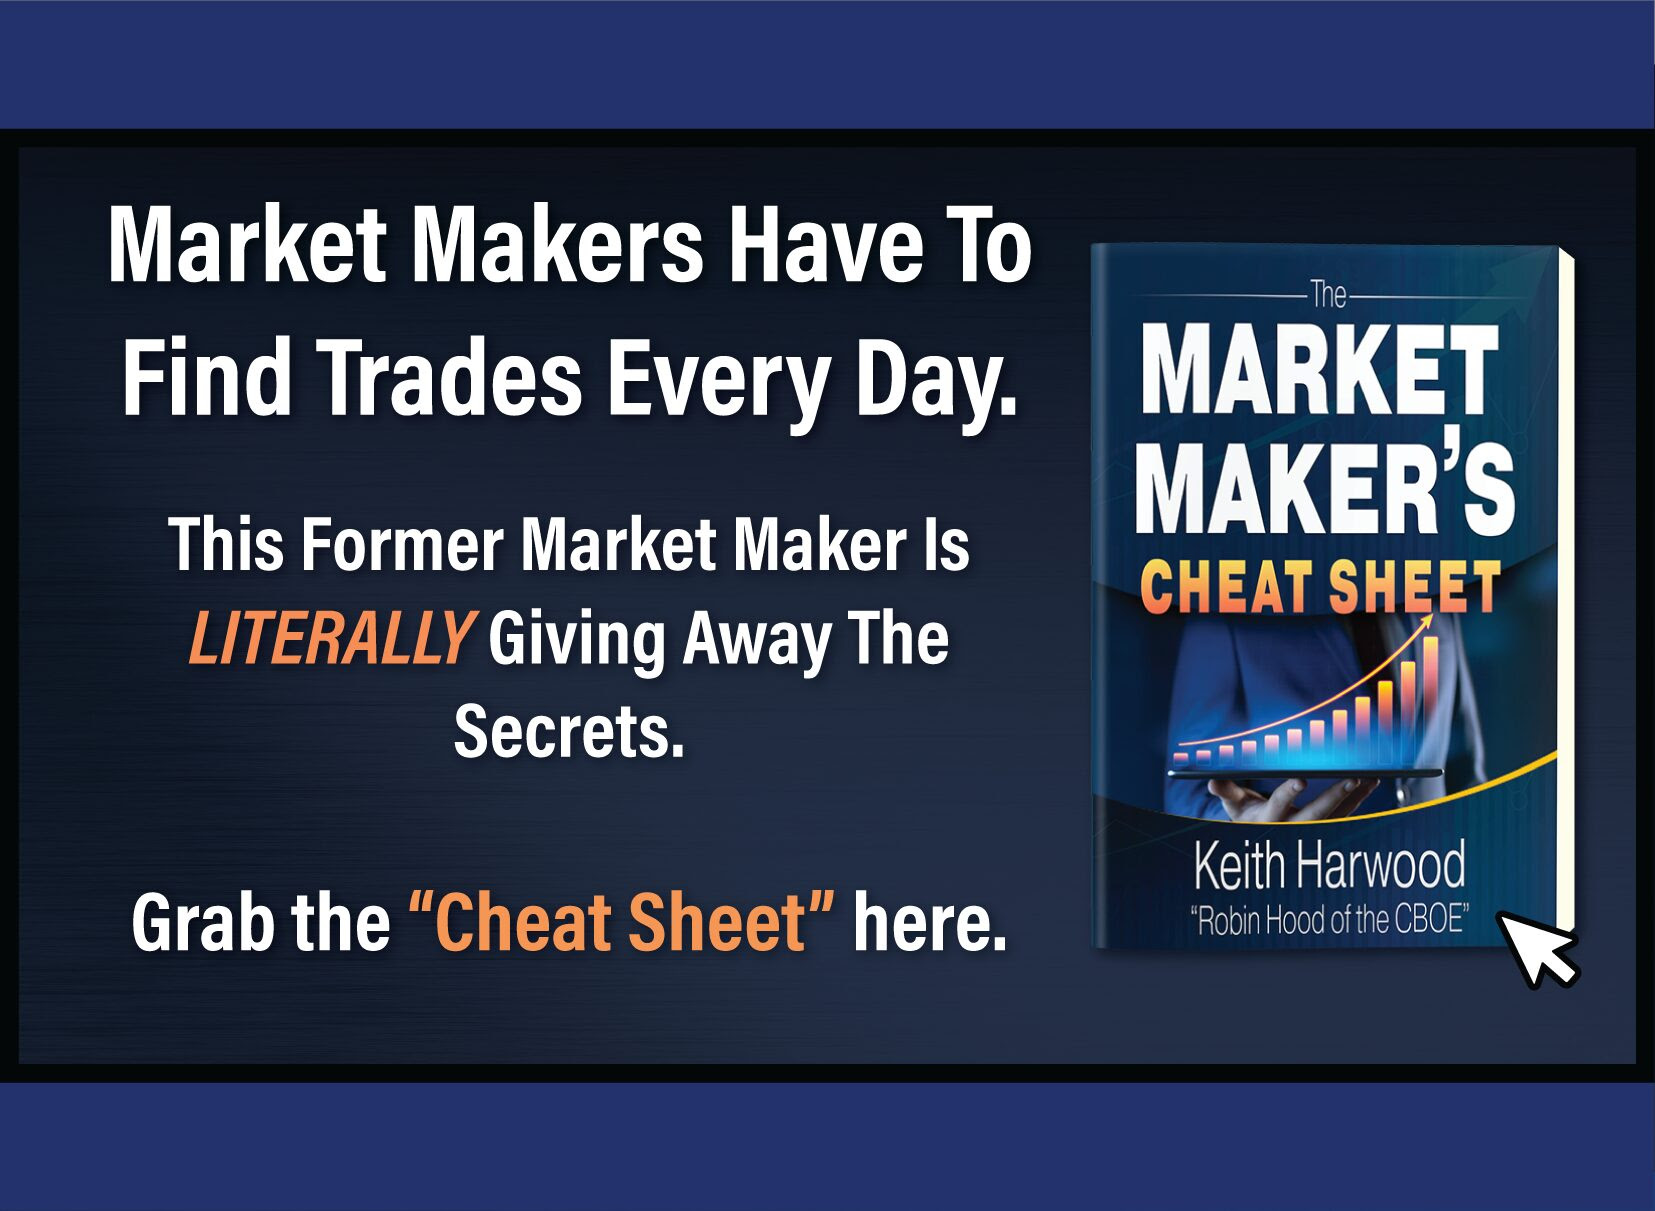 Get Keith's Market Maker Cheat Sheet here for free!